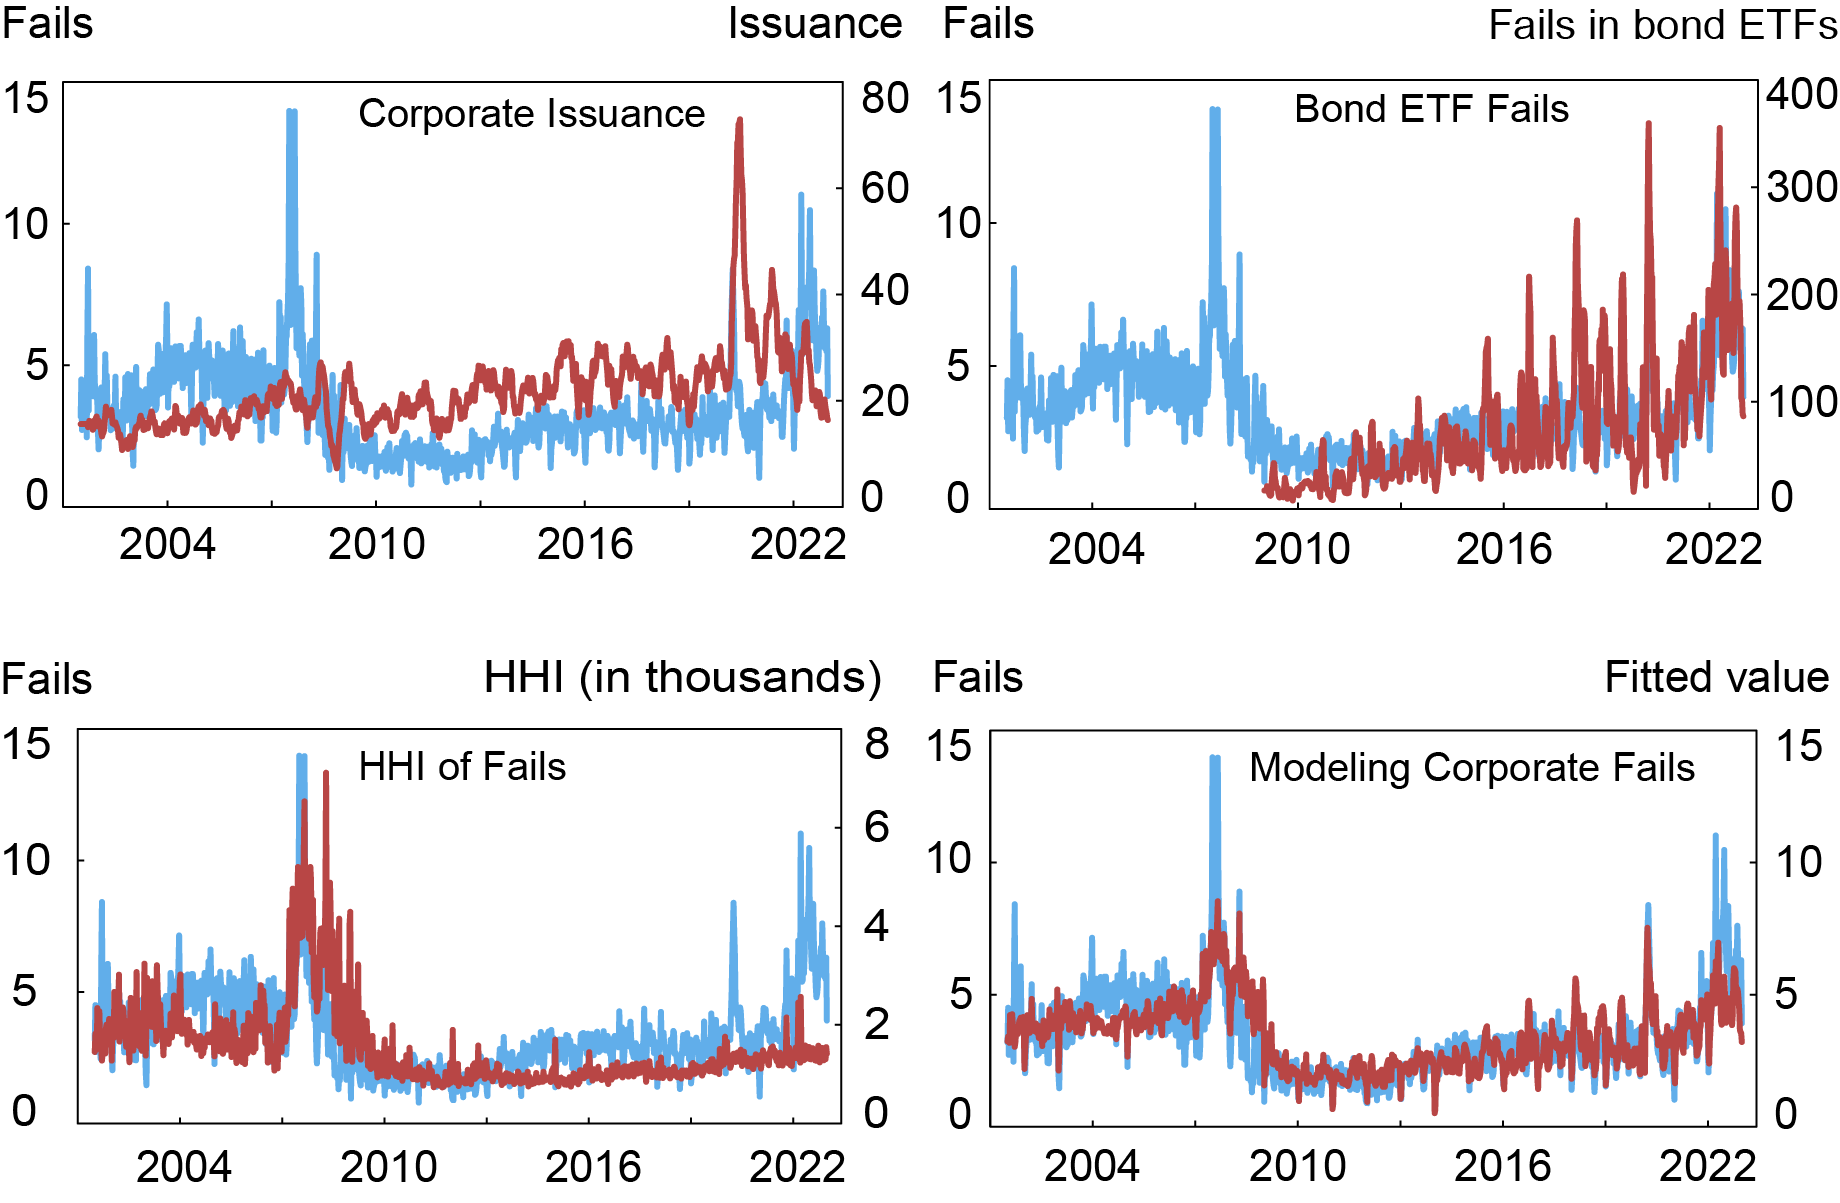 Liberty Street Economics four-panel chart plotting average daily corporate fails in billions per day against corporate issuance in billions per week as a twelve-week moving average (top left chart). The top right chart shows bond ETF fails since 2010 in millions per day as a twenty-one trading day moving average for the largest investment grade and high yield bond ETFs by market cap, while the bottom left chart shows an Herfindahl-Hirschman index (HHI) measure that equals the sum of squared weekly shares of fails across primary dealers multiplied by 10,000, and the bottom right chart shows the fitted value from a regression model that controls for trading volume, corporate issuance, bond ETF fails, the HHI measure, and seasonal effects.